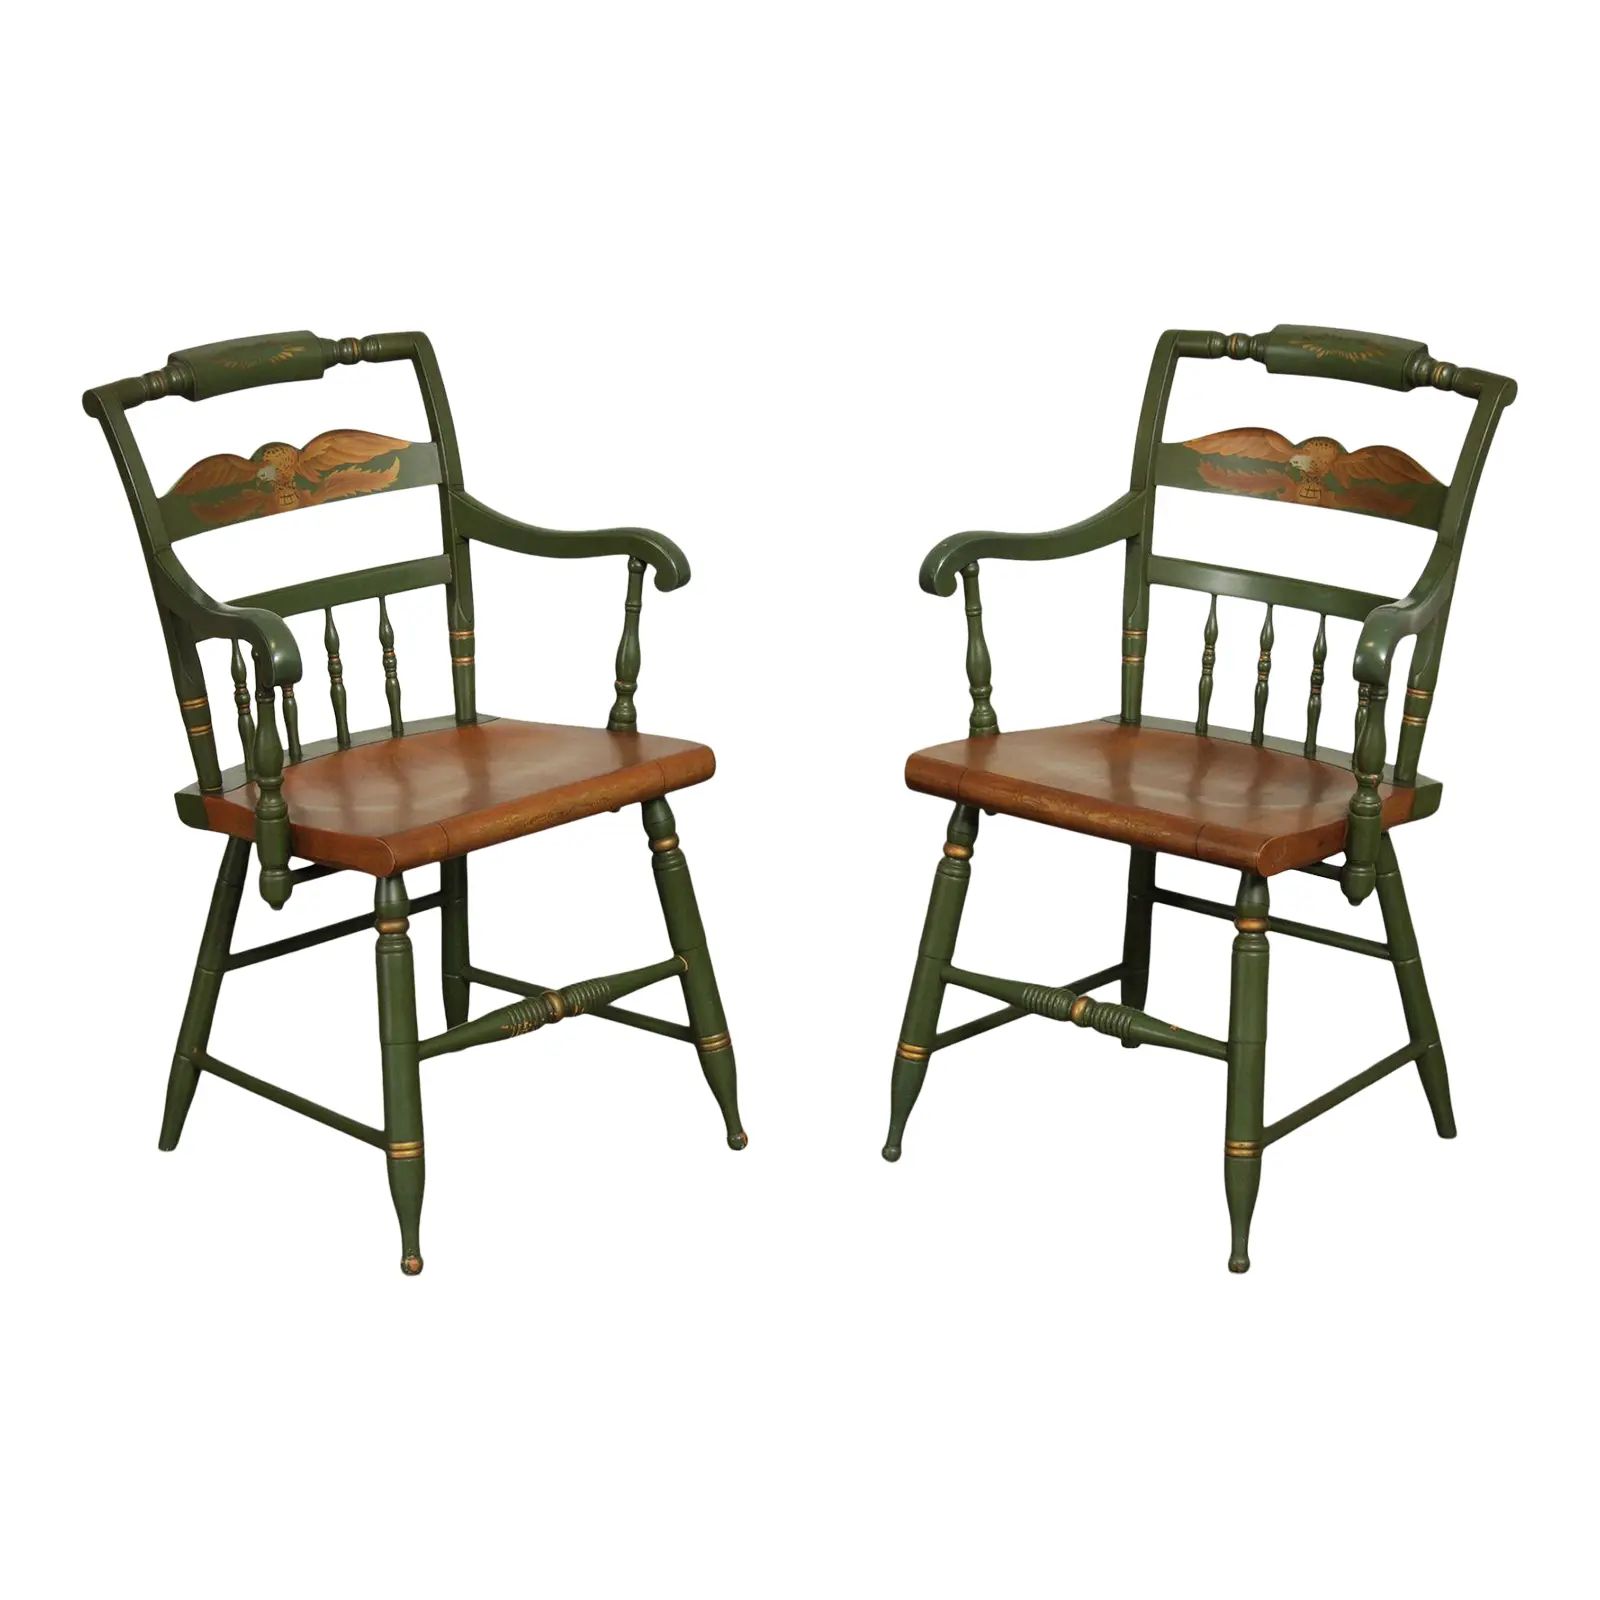 Vintage Hitchcock Green Painted Armchairs - A Pair | Chairish